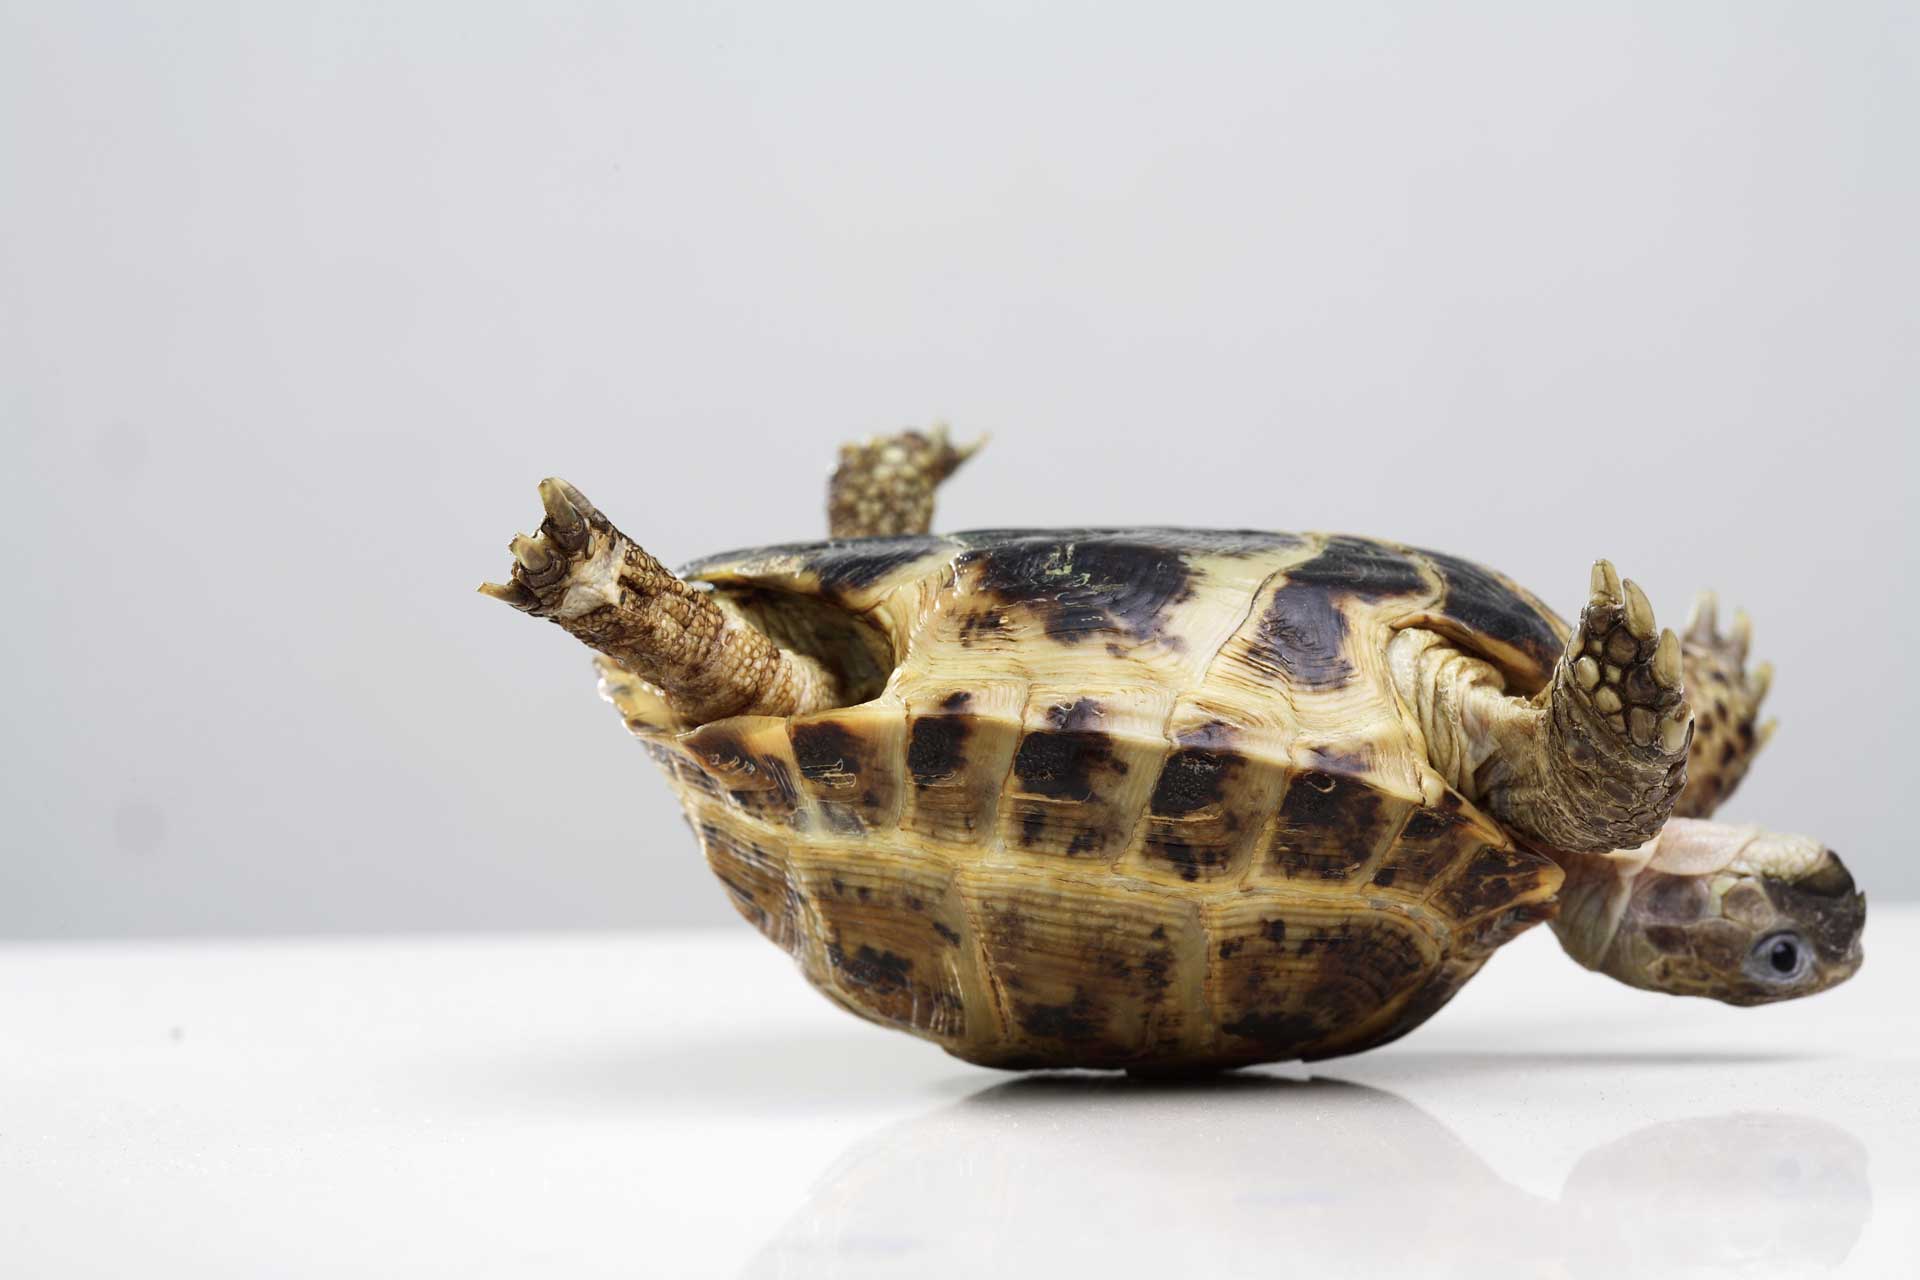 upside down tortoise showing resilience and positivity